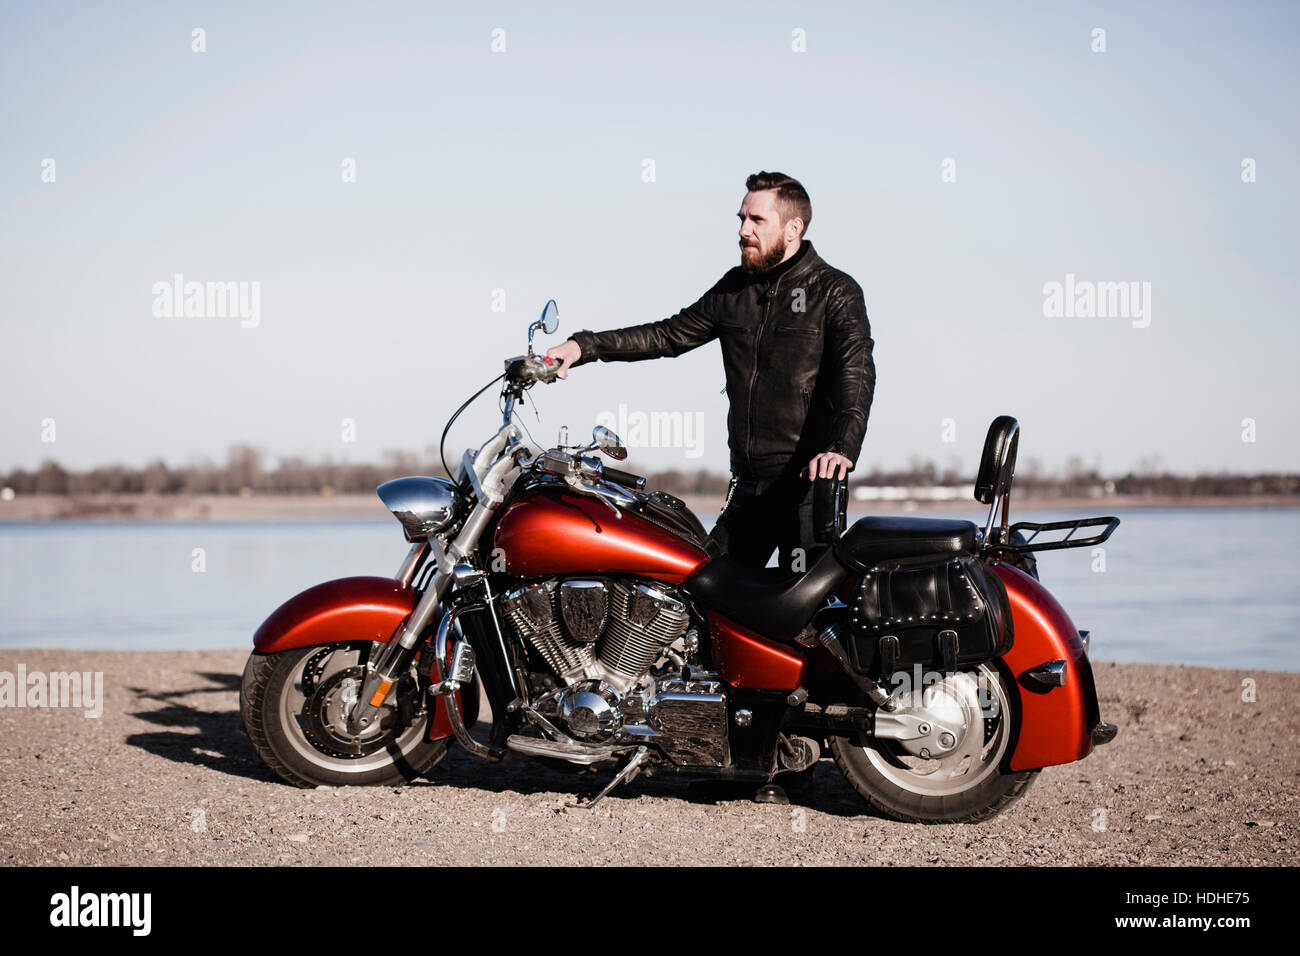 Full length portrait of biker standing by motorcycle and looking away at lakeshore Stock Photo